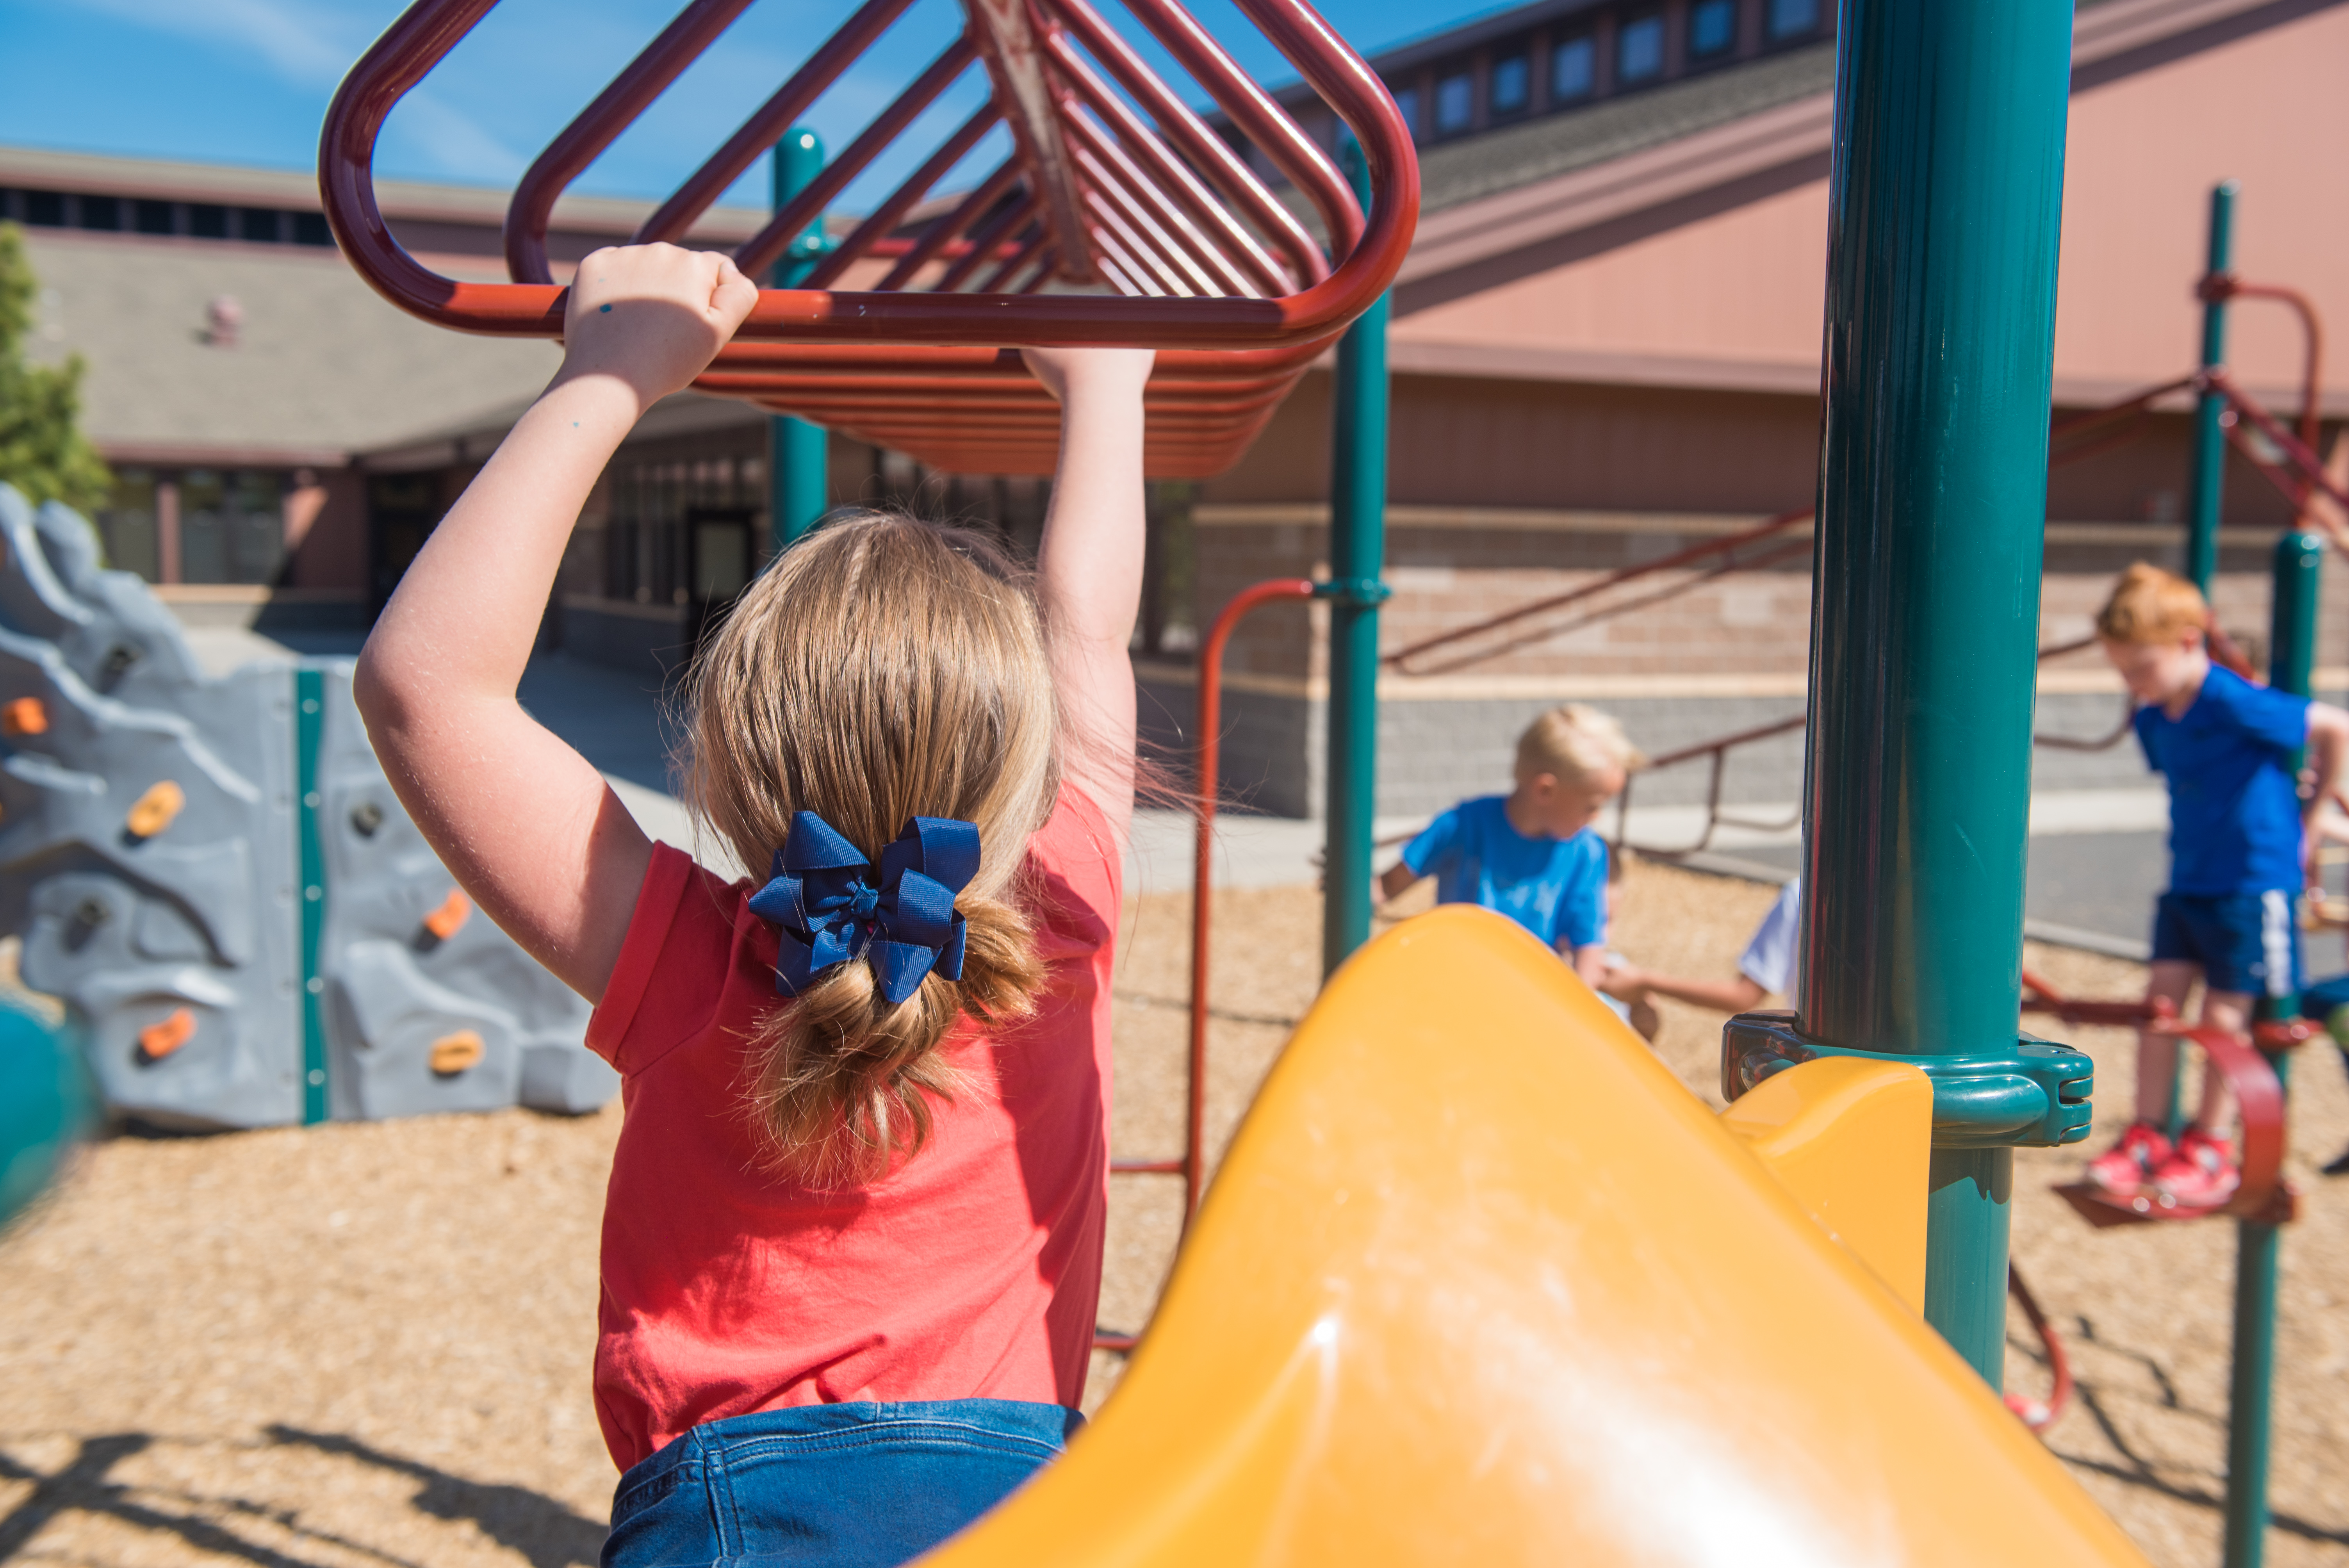 Elementary-age girl holding on to monkey bars in playground. Photo taken behind her. She's wearing a red shirt and has dark blond hair tied up with a dark blue bow.